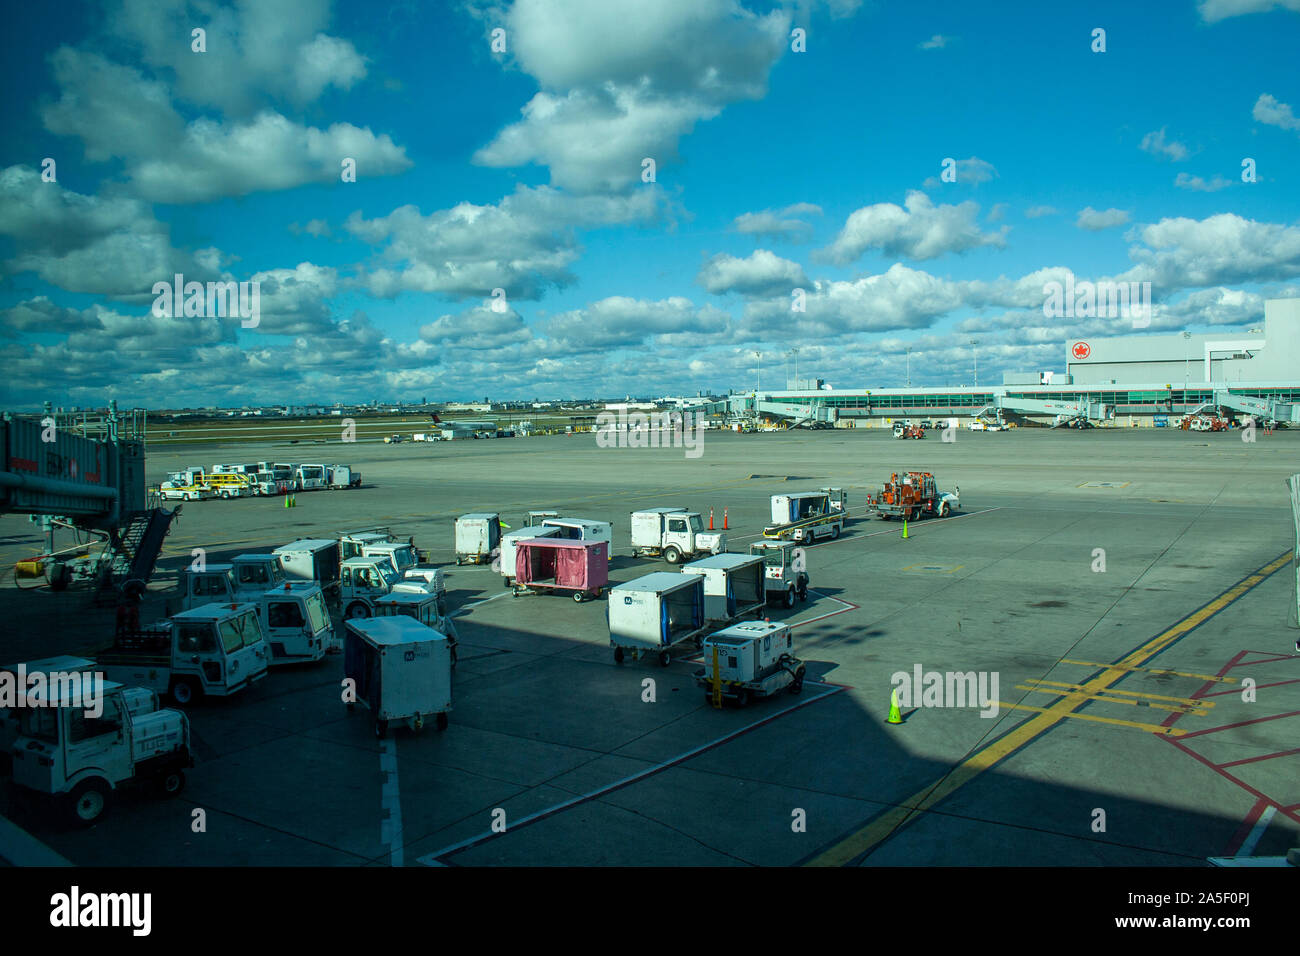 October 14, 2019 - Toronto, Ontario Canada- Empty luggage carriers on the gate tarmac at Pearson Airport in Toronto Stock Photo